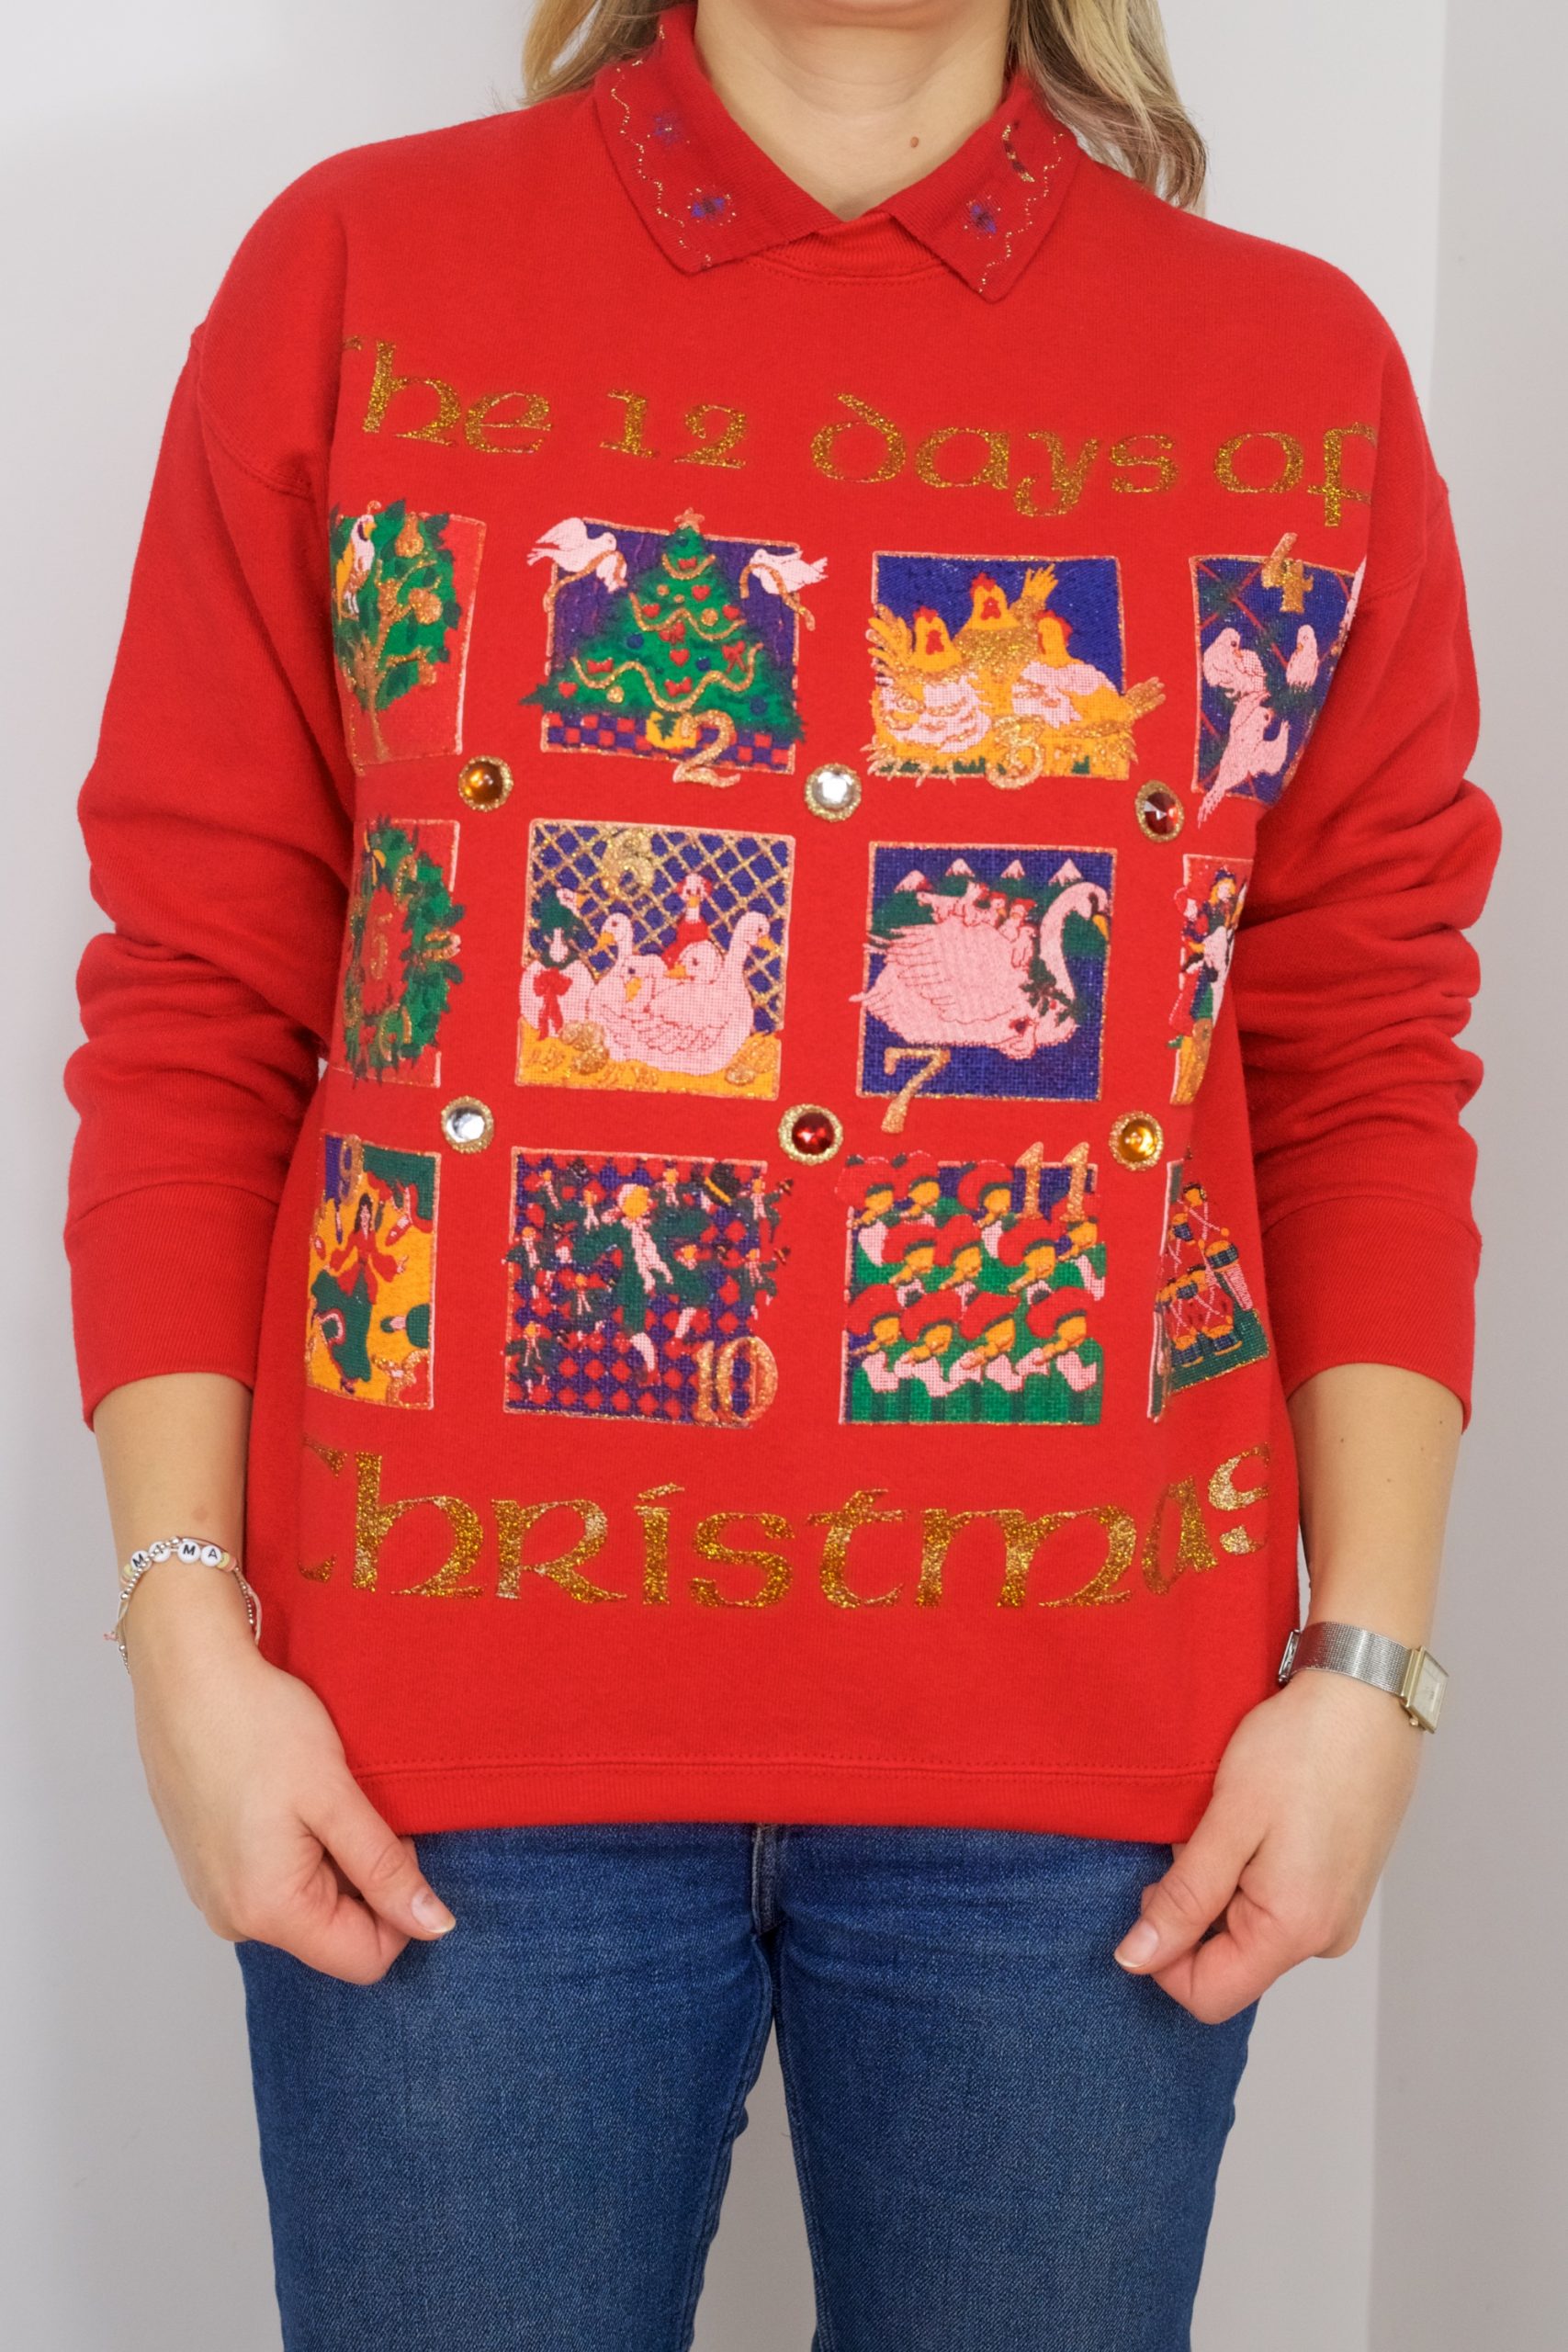 Twelve Days of Christmas Sweater Save the Children Shop